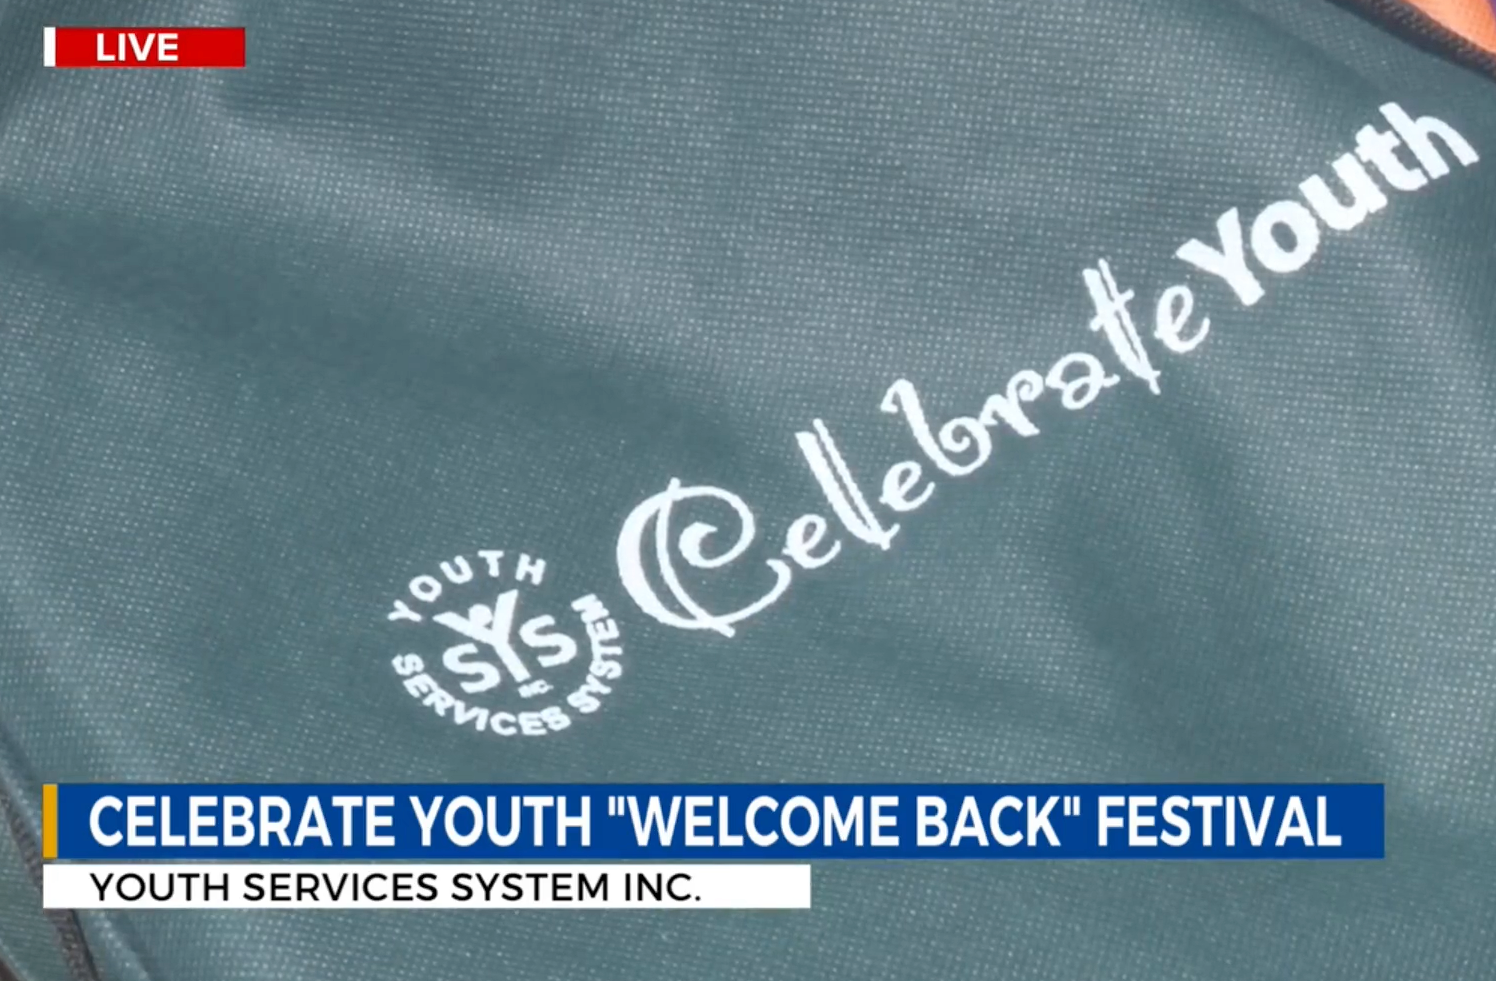 Thumbnail for Celebrate Youth Festival is BACK in person (WTRF)